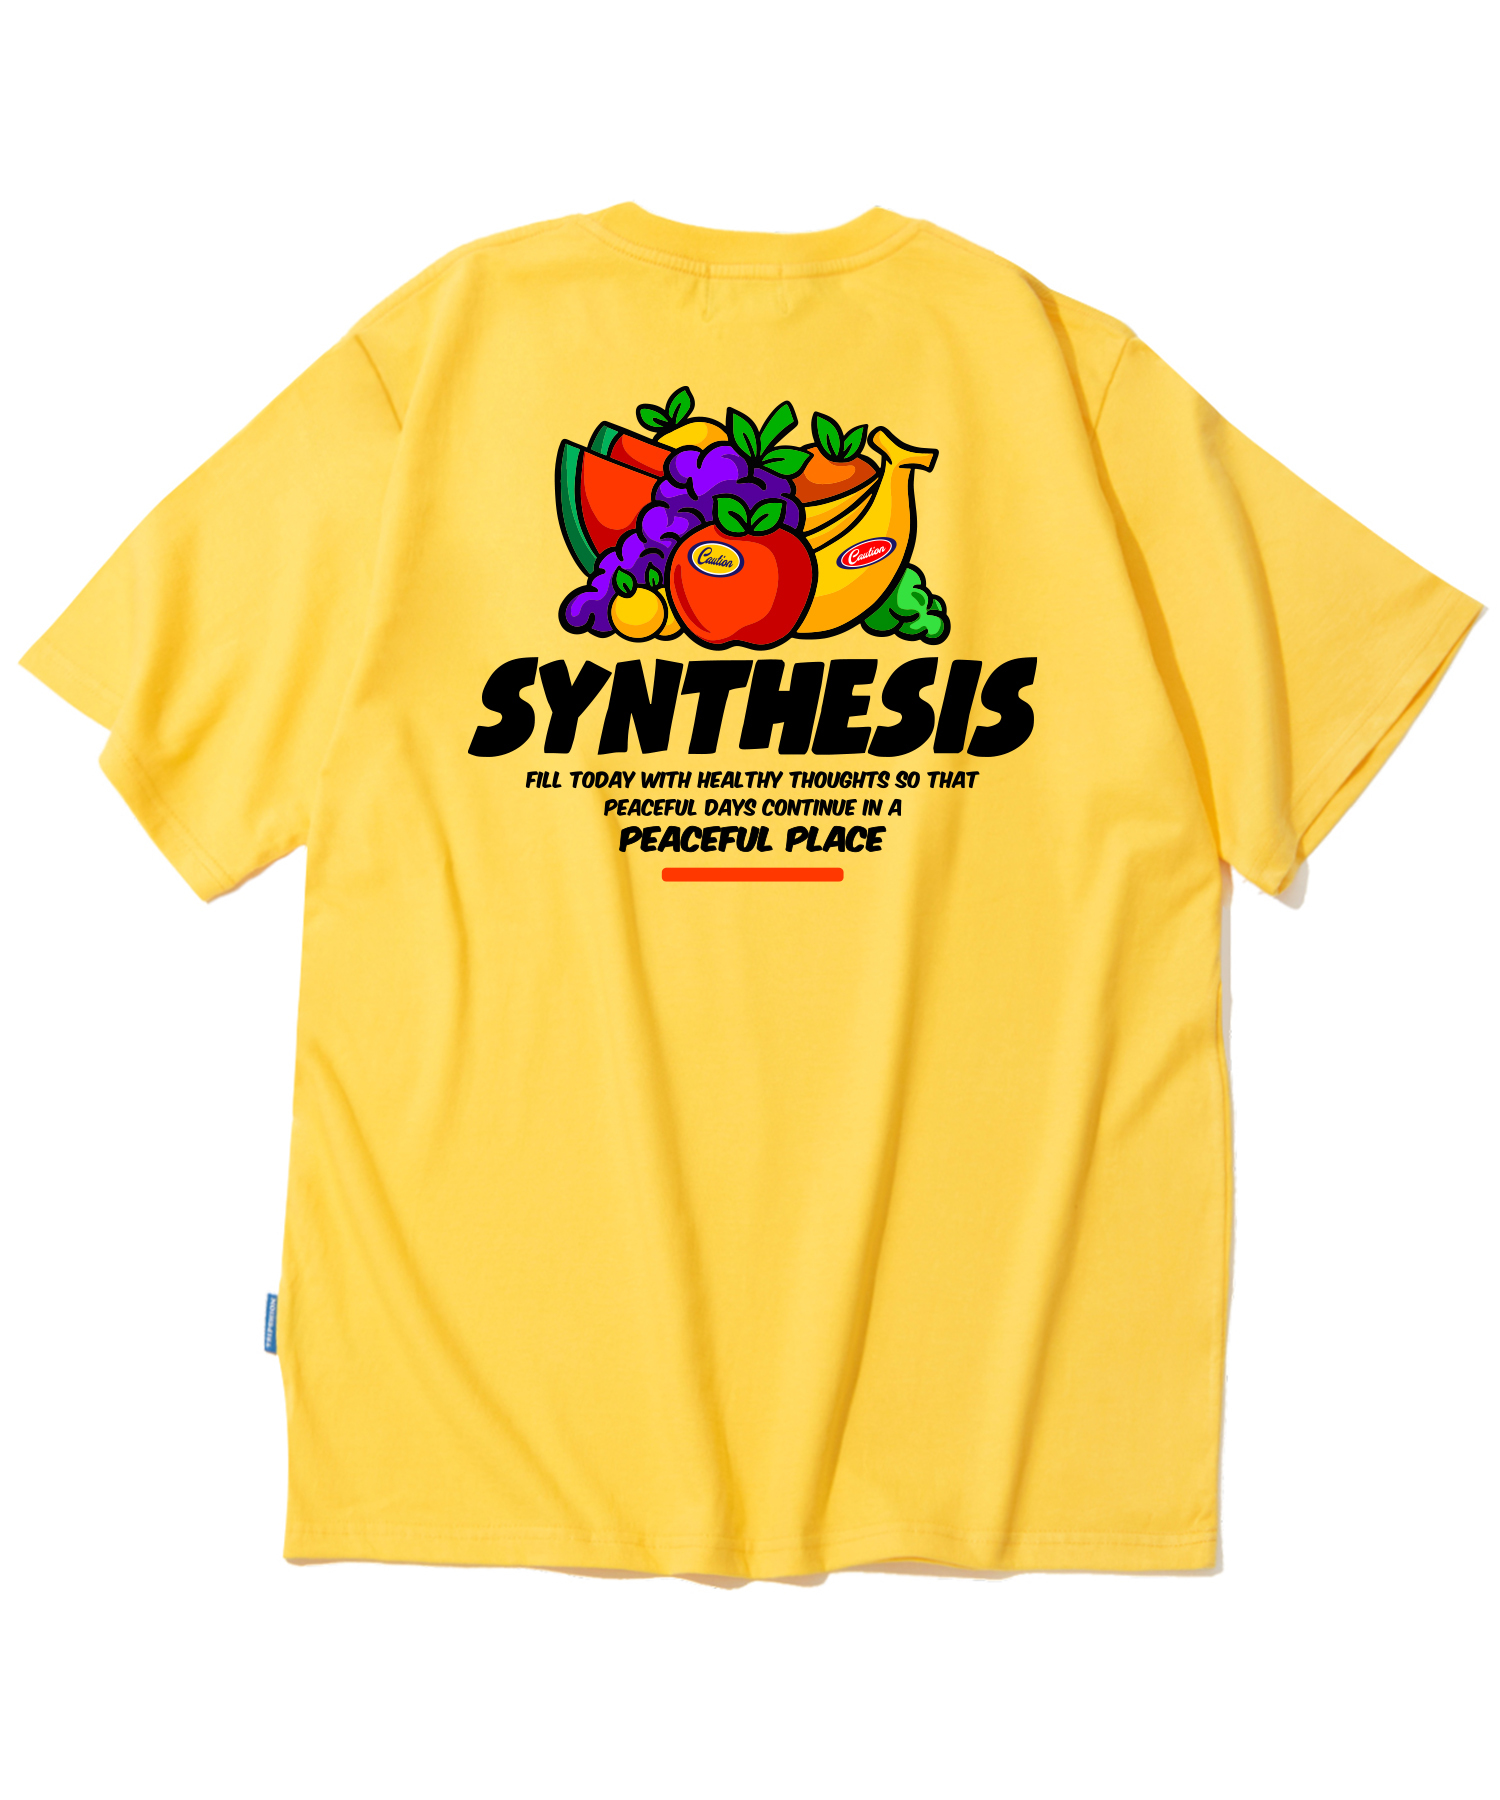 ASSORTED FRUITS GRAPHIC T-SHIRTS - YELLOW